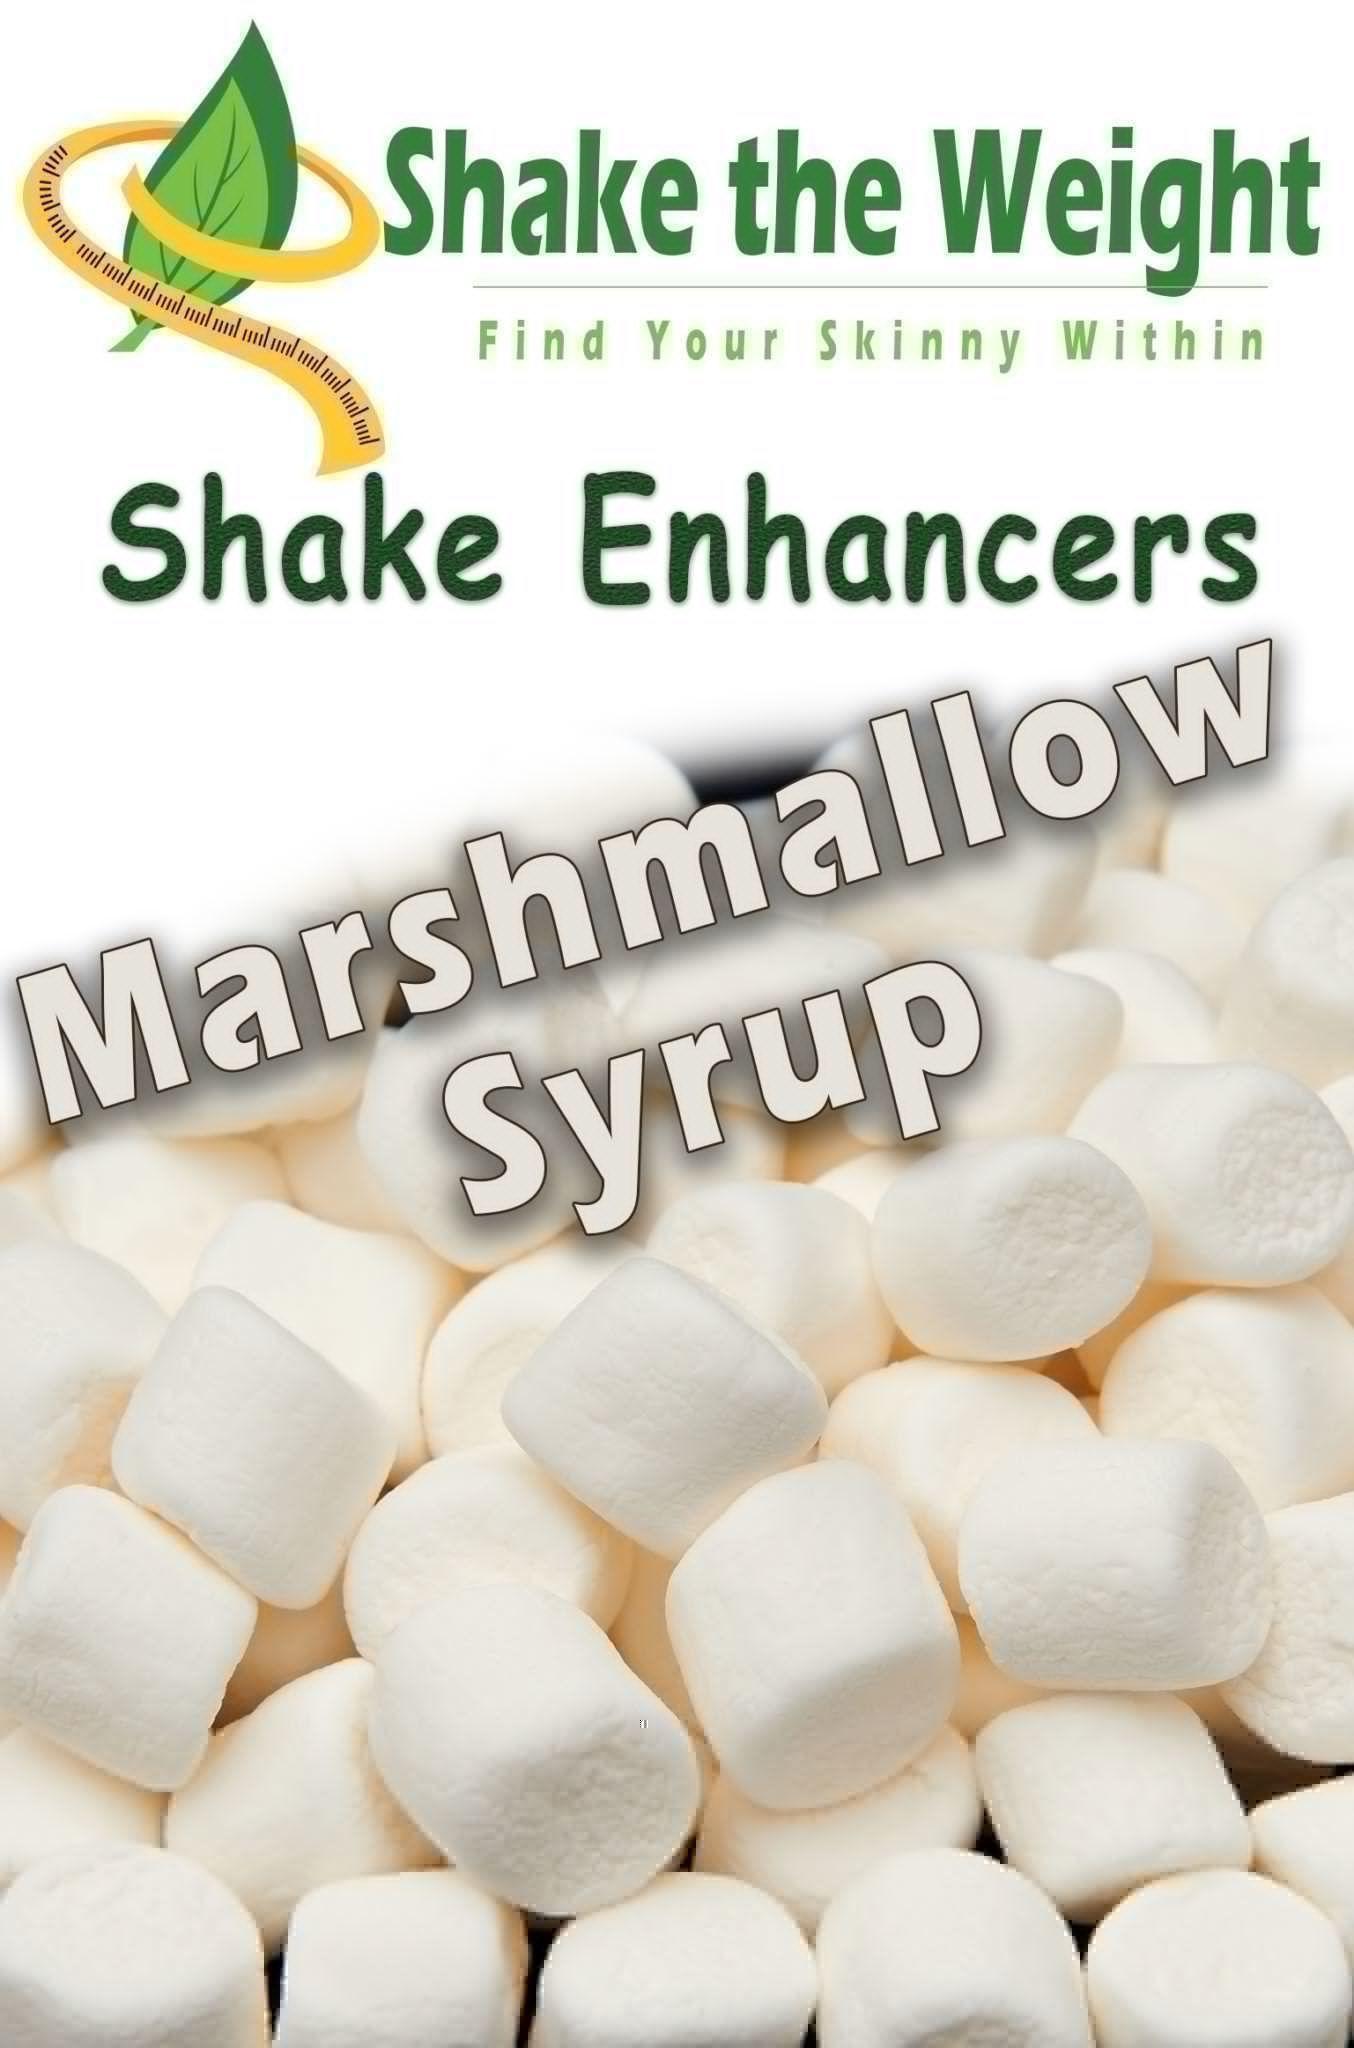 marshmallow Syrup, smoothies, weight loss smoothies, smoothie diet, meal replacement smoothie, smoothies for weight loss, smoothie meal replacement, protein smoothies, sugar free Syrup